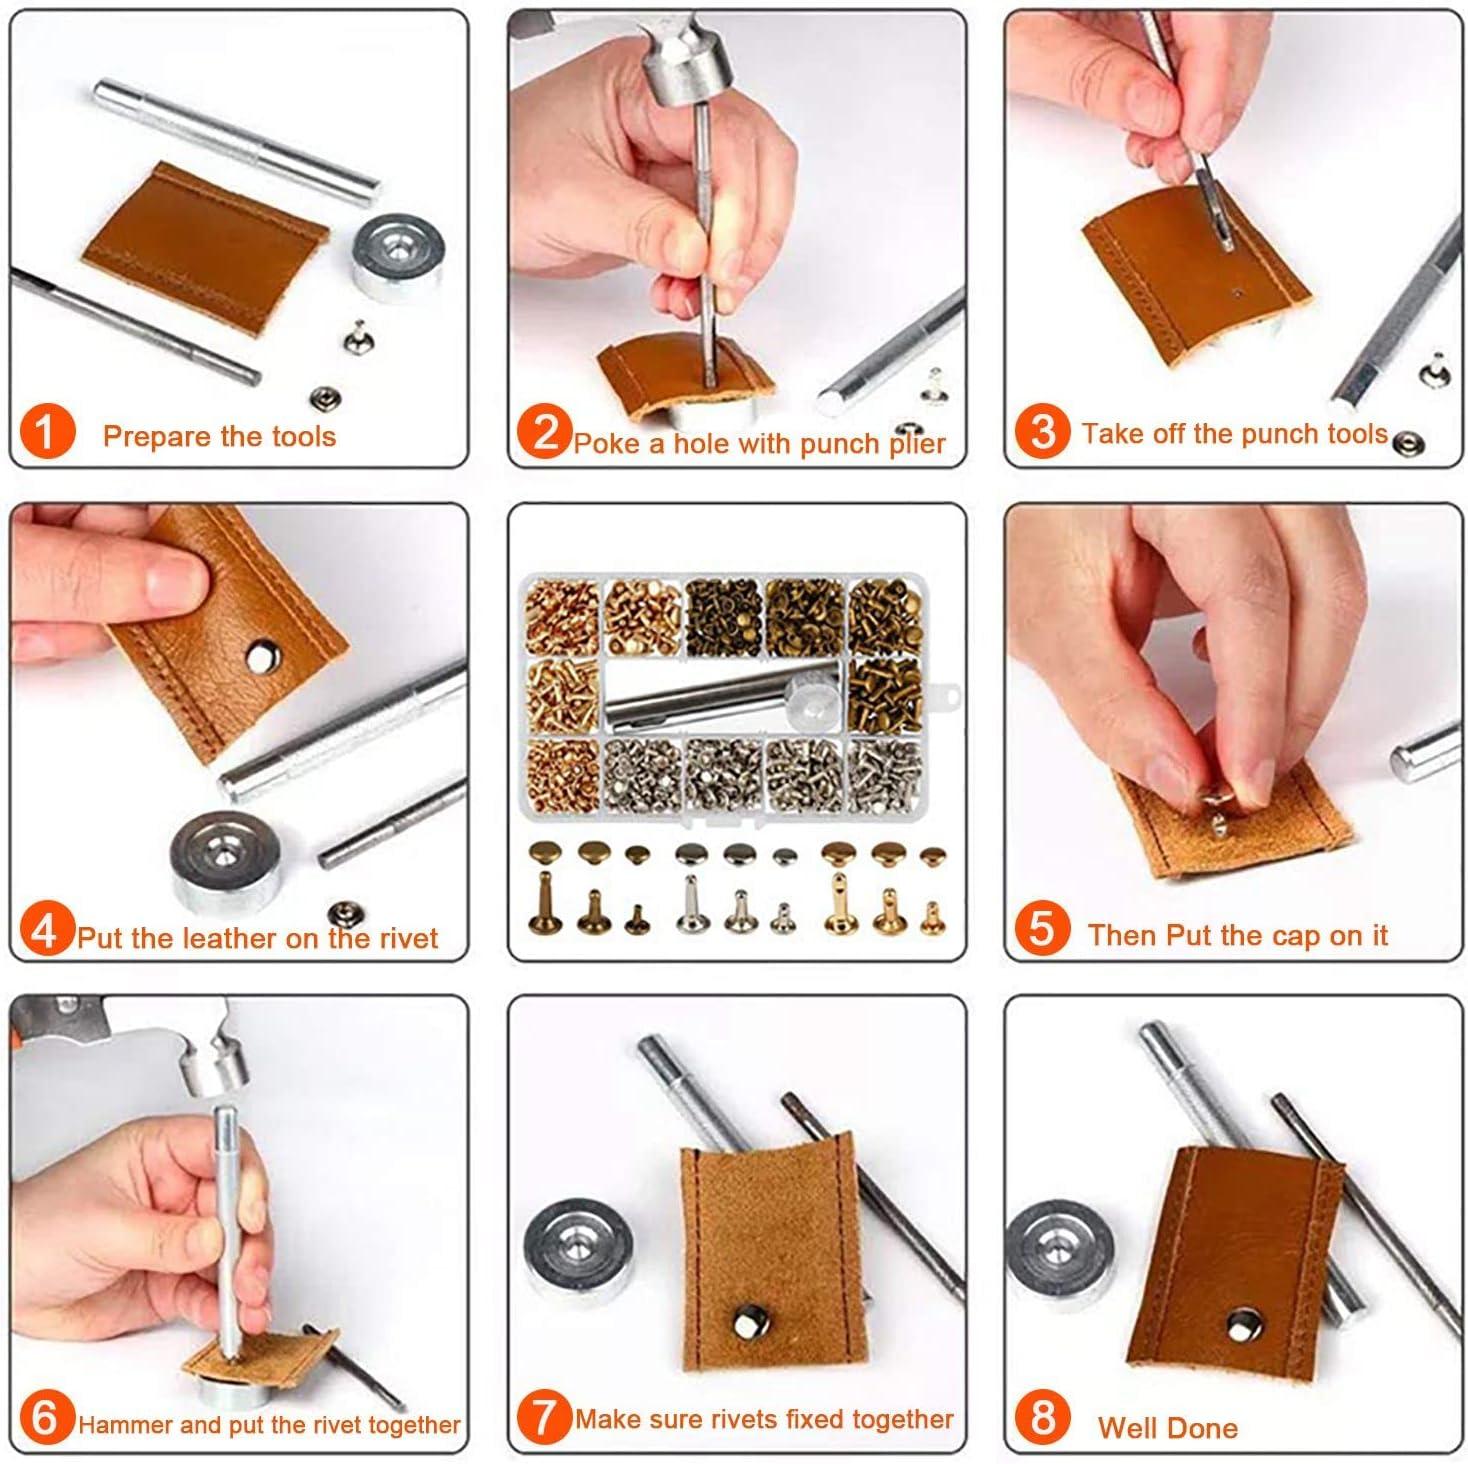 Jetmore 420 Sets Leather Rivets Kit, Double Cap Brass Rivets Leather Studs with 3pcs Setting Tools for Leather Repair and Crafts, 4 Colors and 3 Sizes